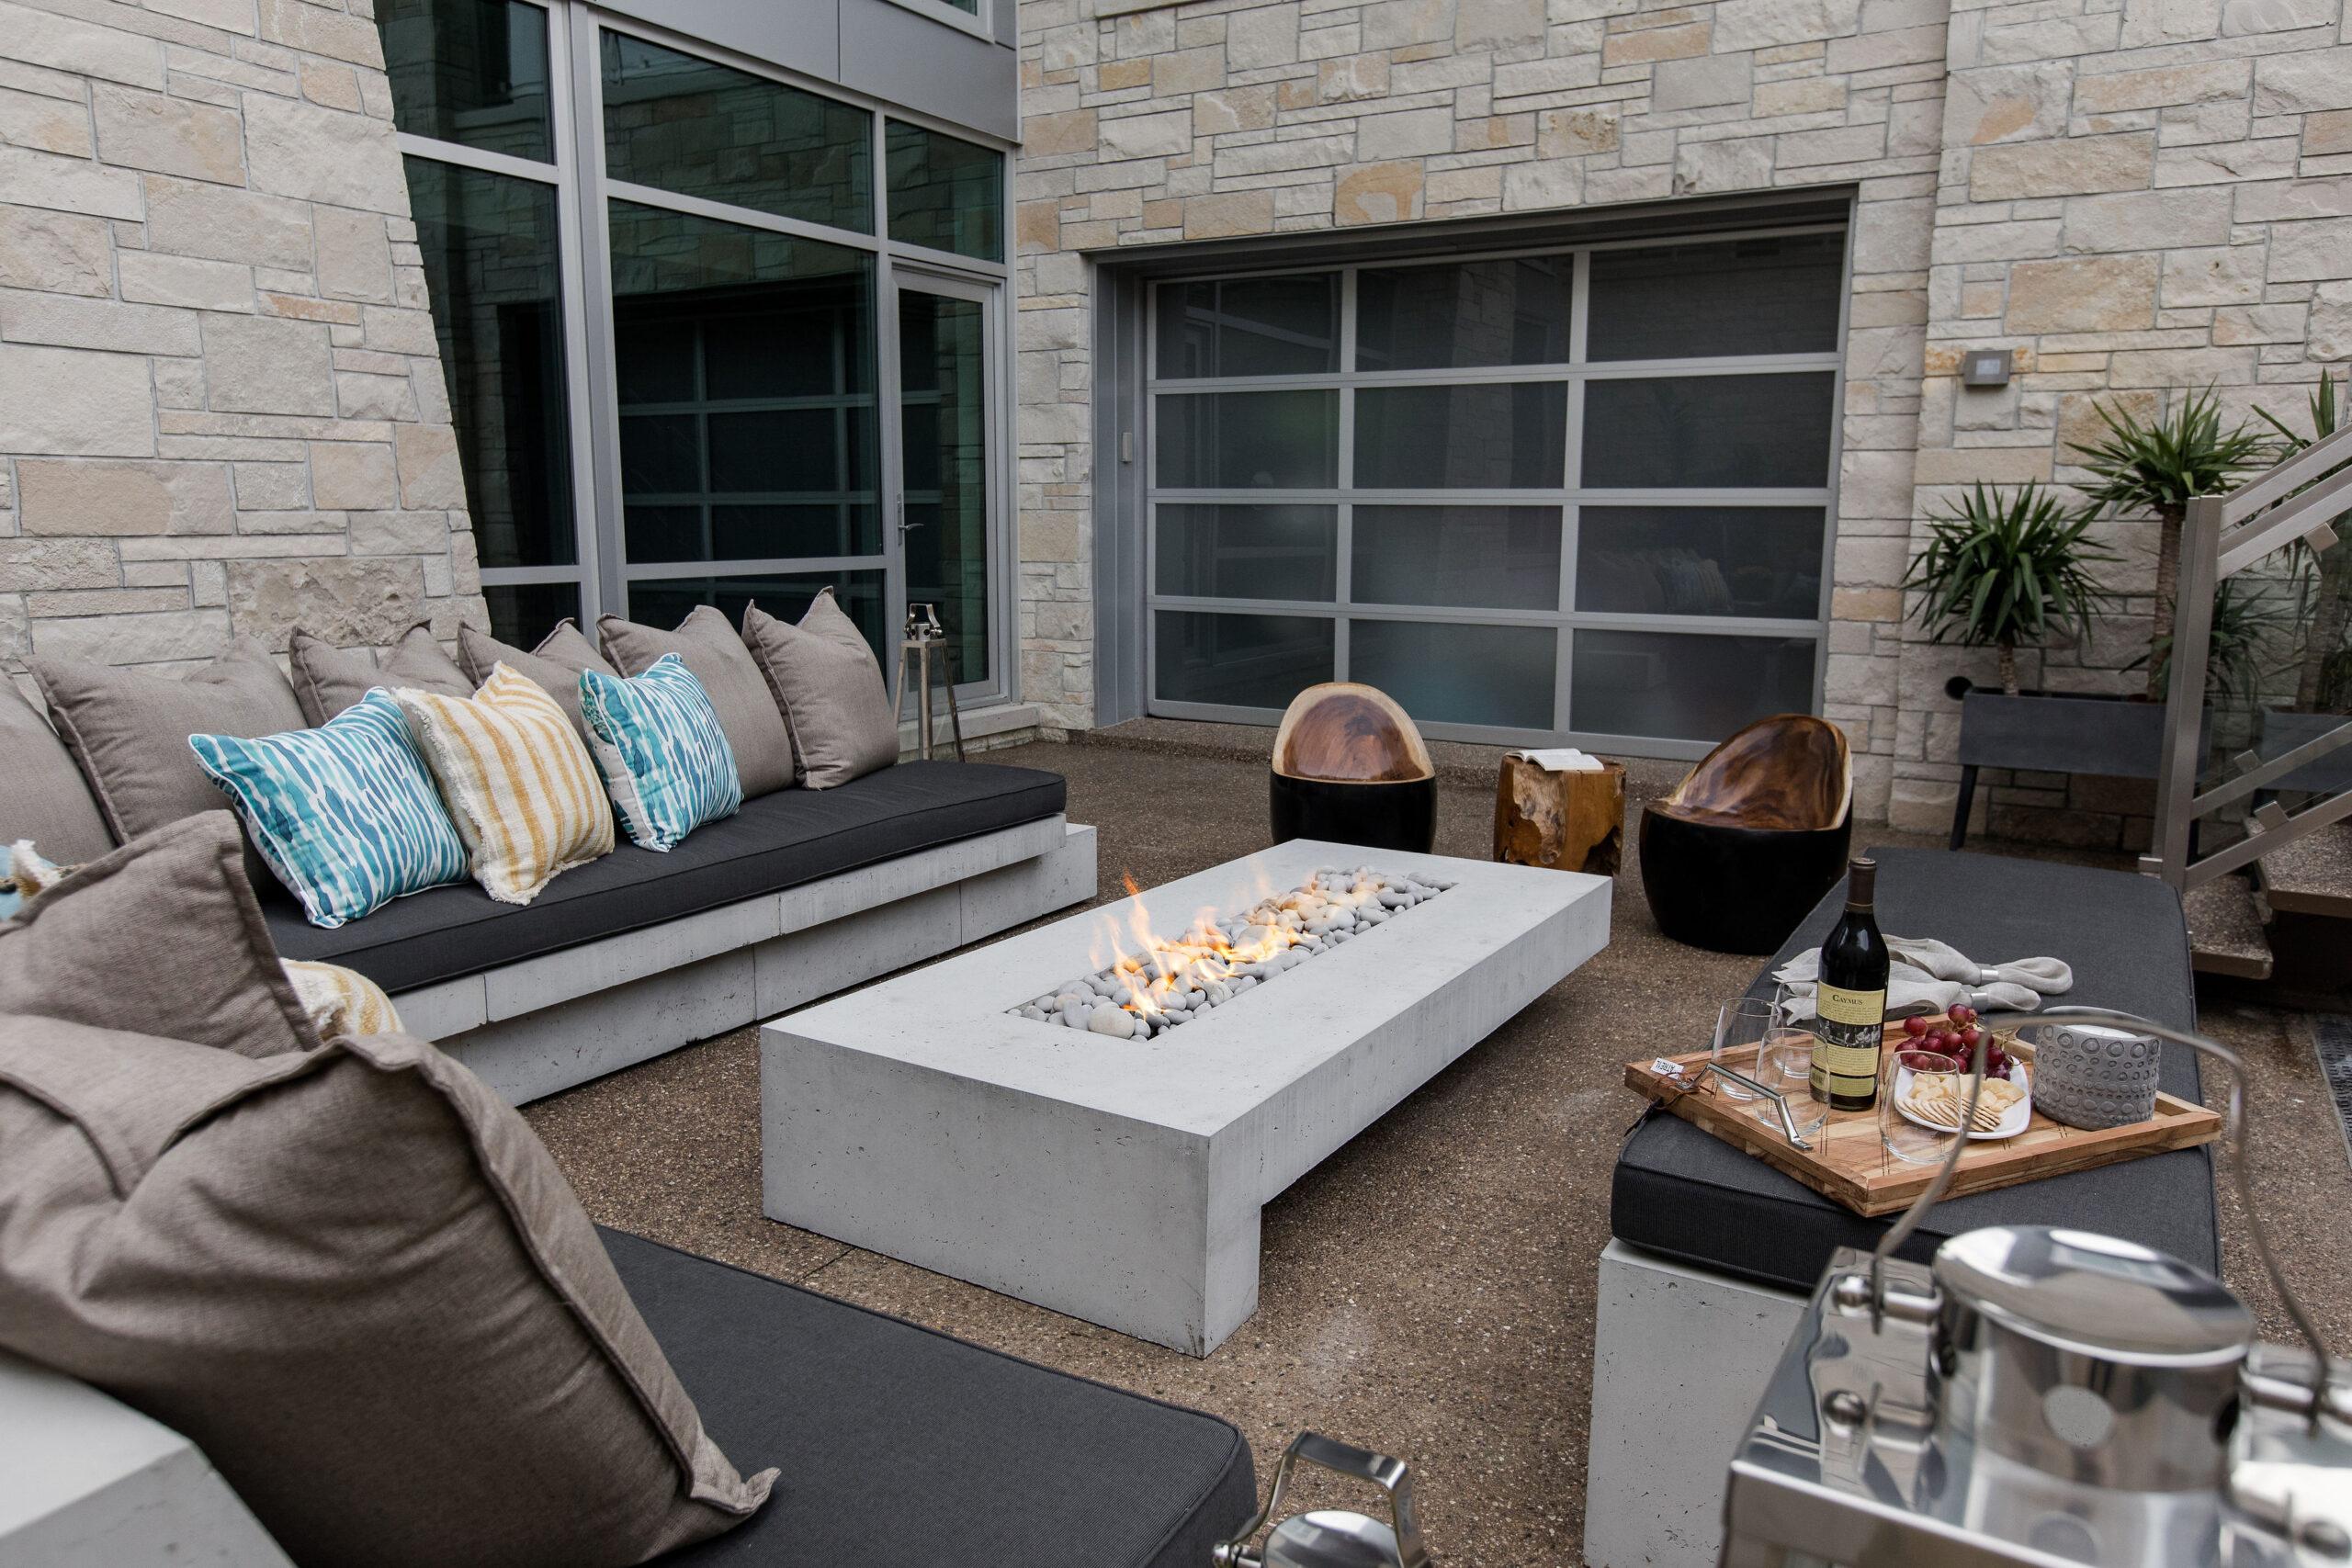 A rectangular Dekko lightweight concrete fire pit in a backyard with couches, wooden chairs, and a cheese board surrounding it.